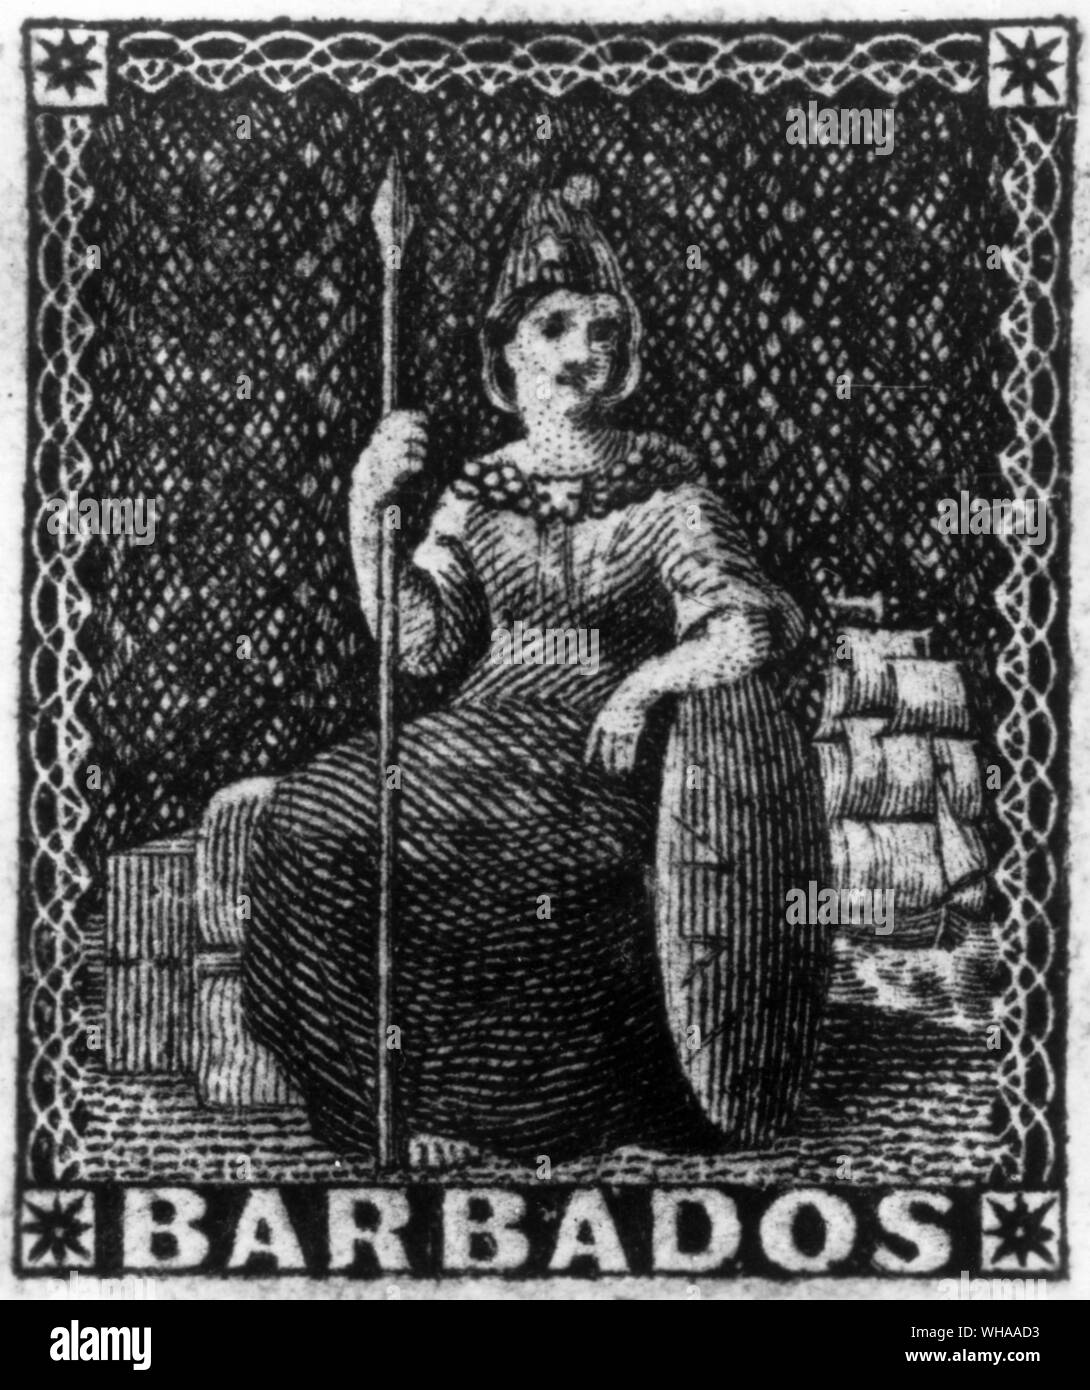 Barbados. The first stamps were recess printed by Perkins bacon & co on blued unwatermarked paper and issued 15th April 1852 in three colours green, blue and slate. Stock Photo